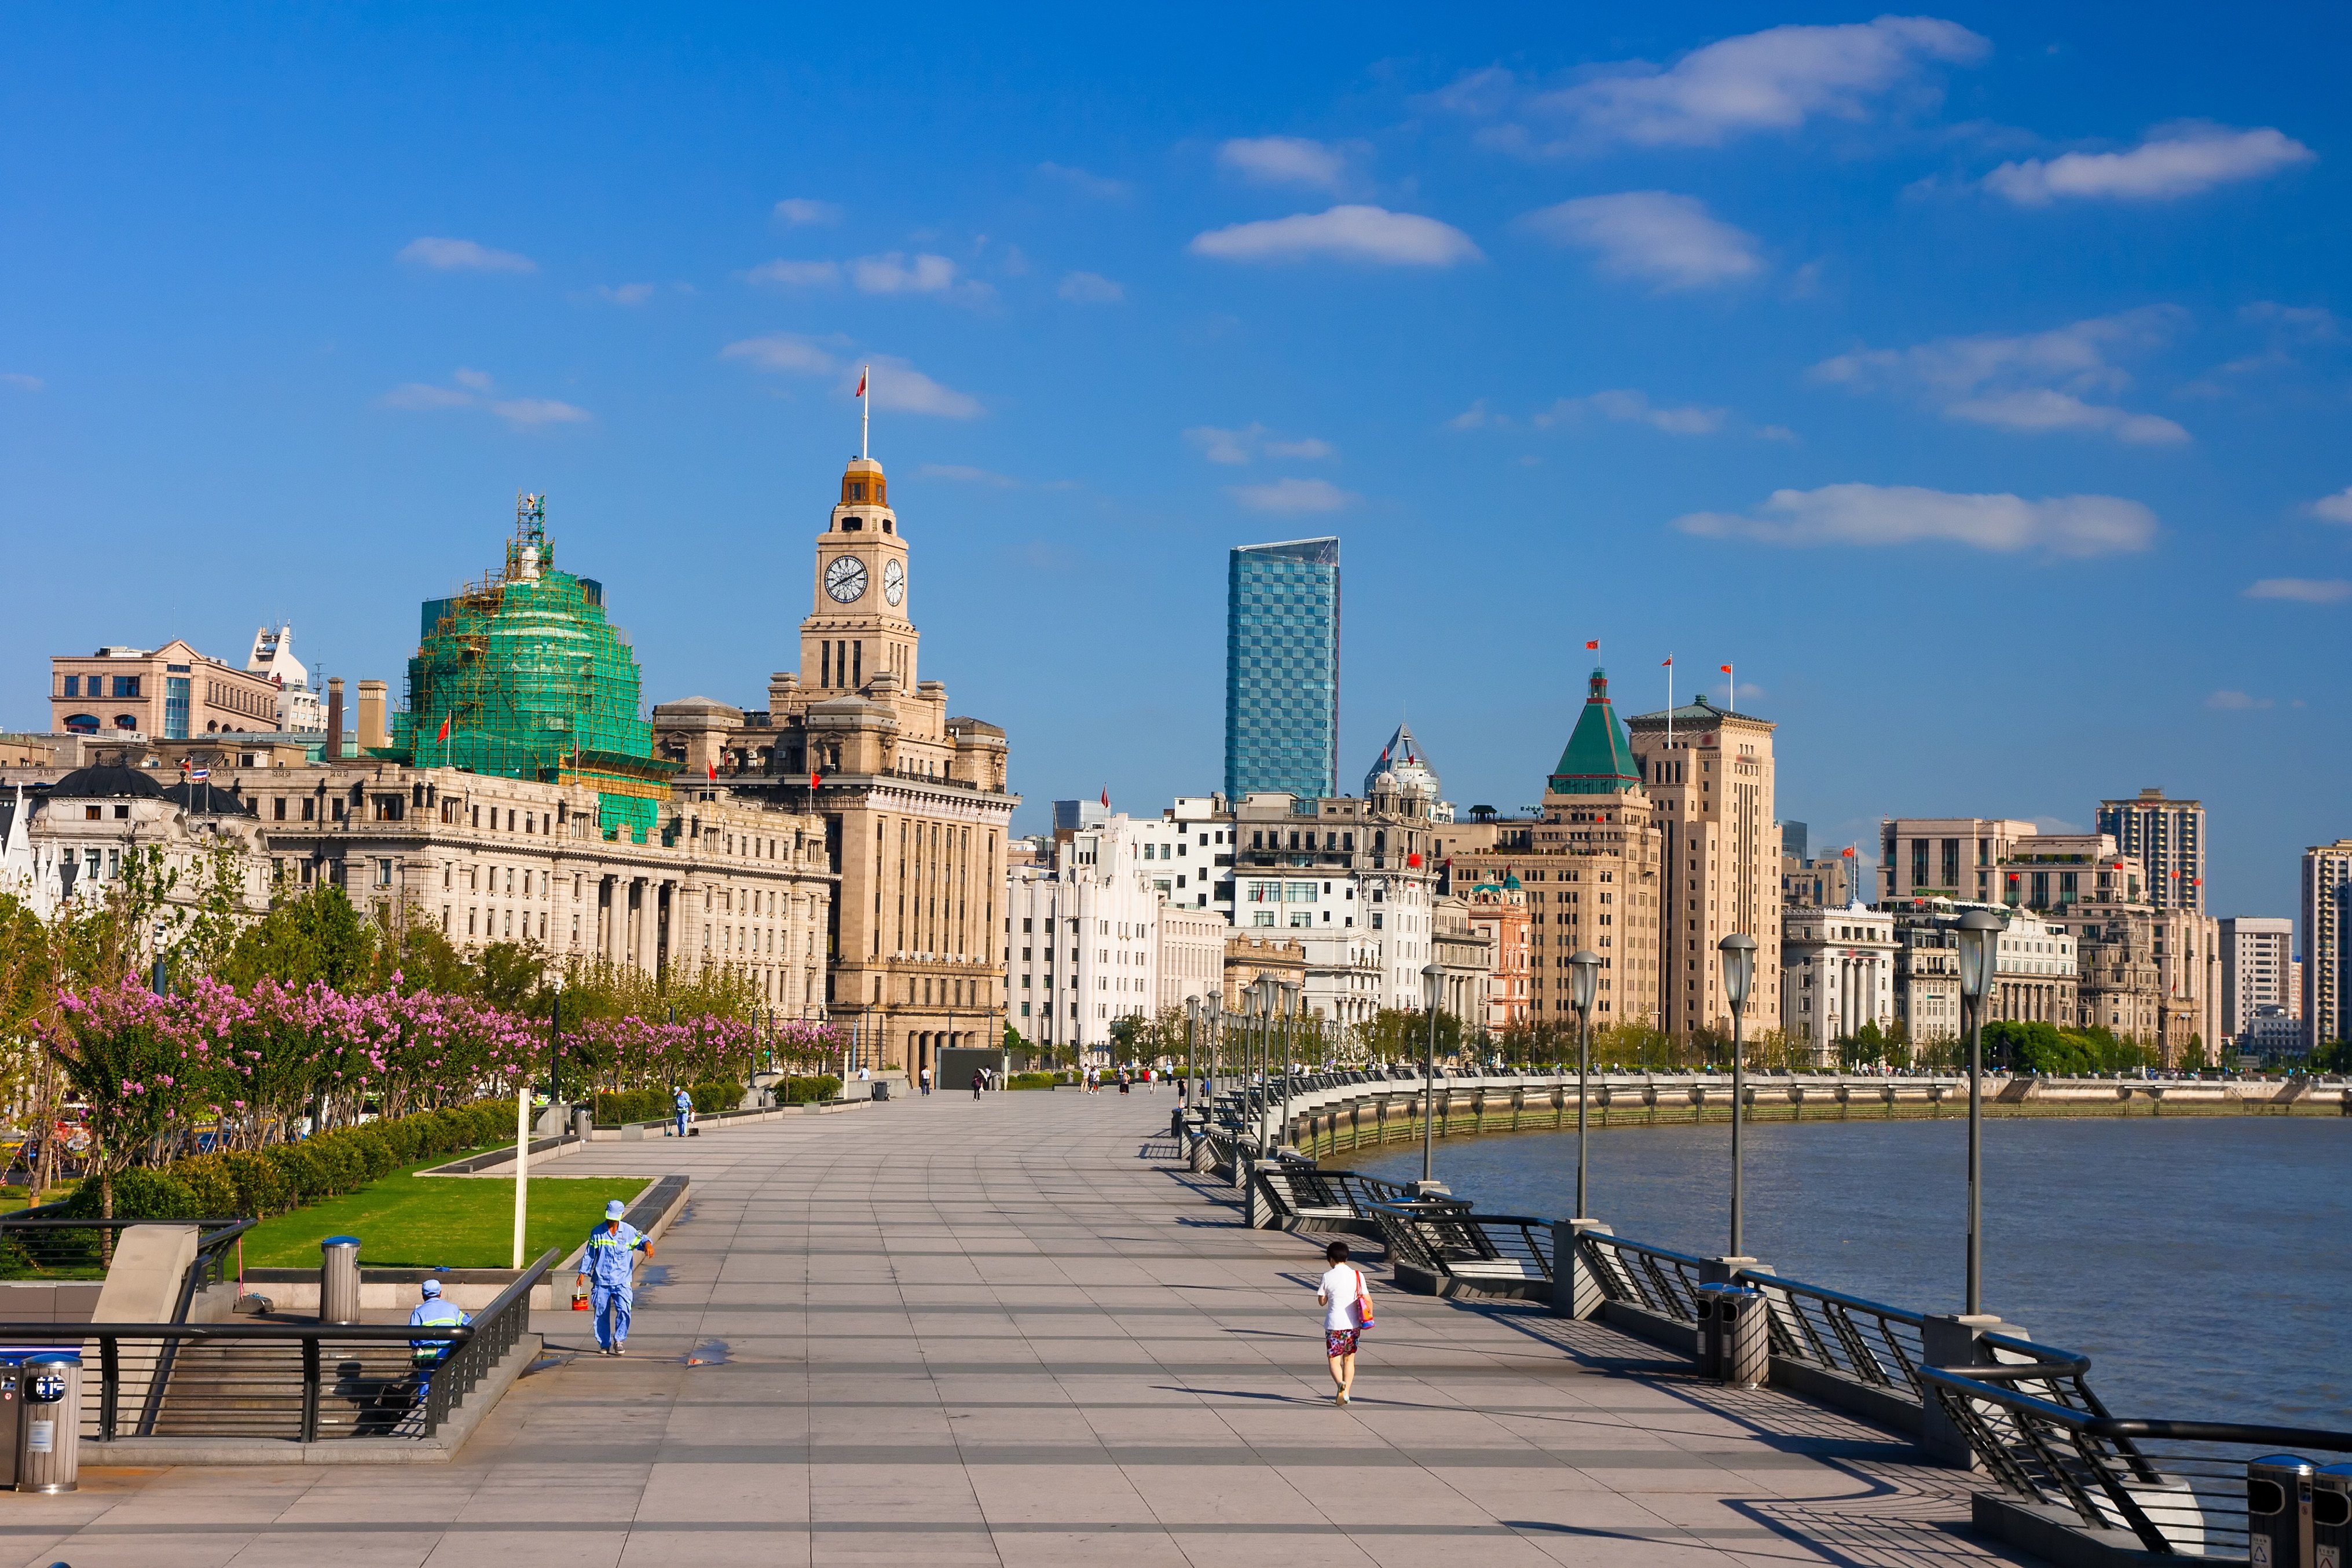 Kerry Properties has won a tender for a prime parcel of land close to The Bund in Shanghai. Photo: Shutterstock Images